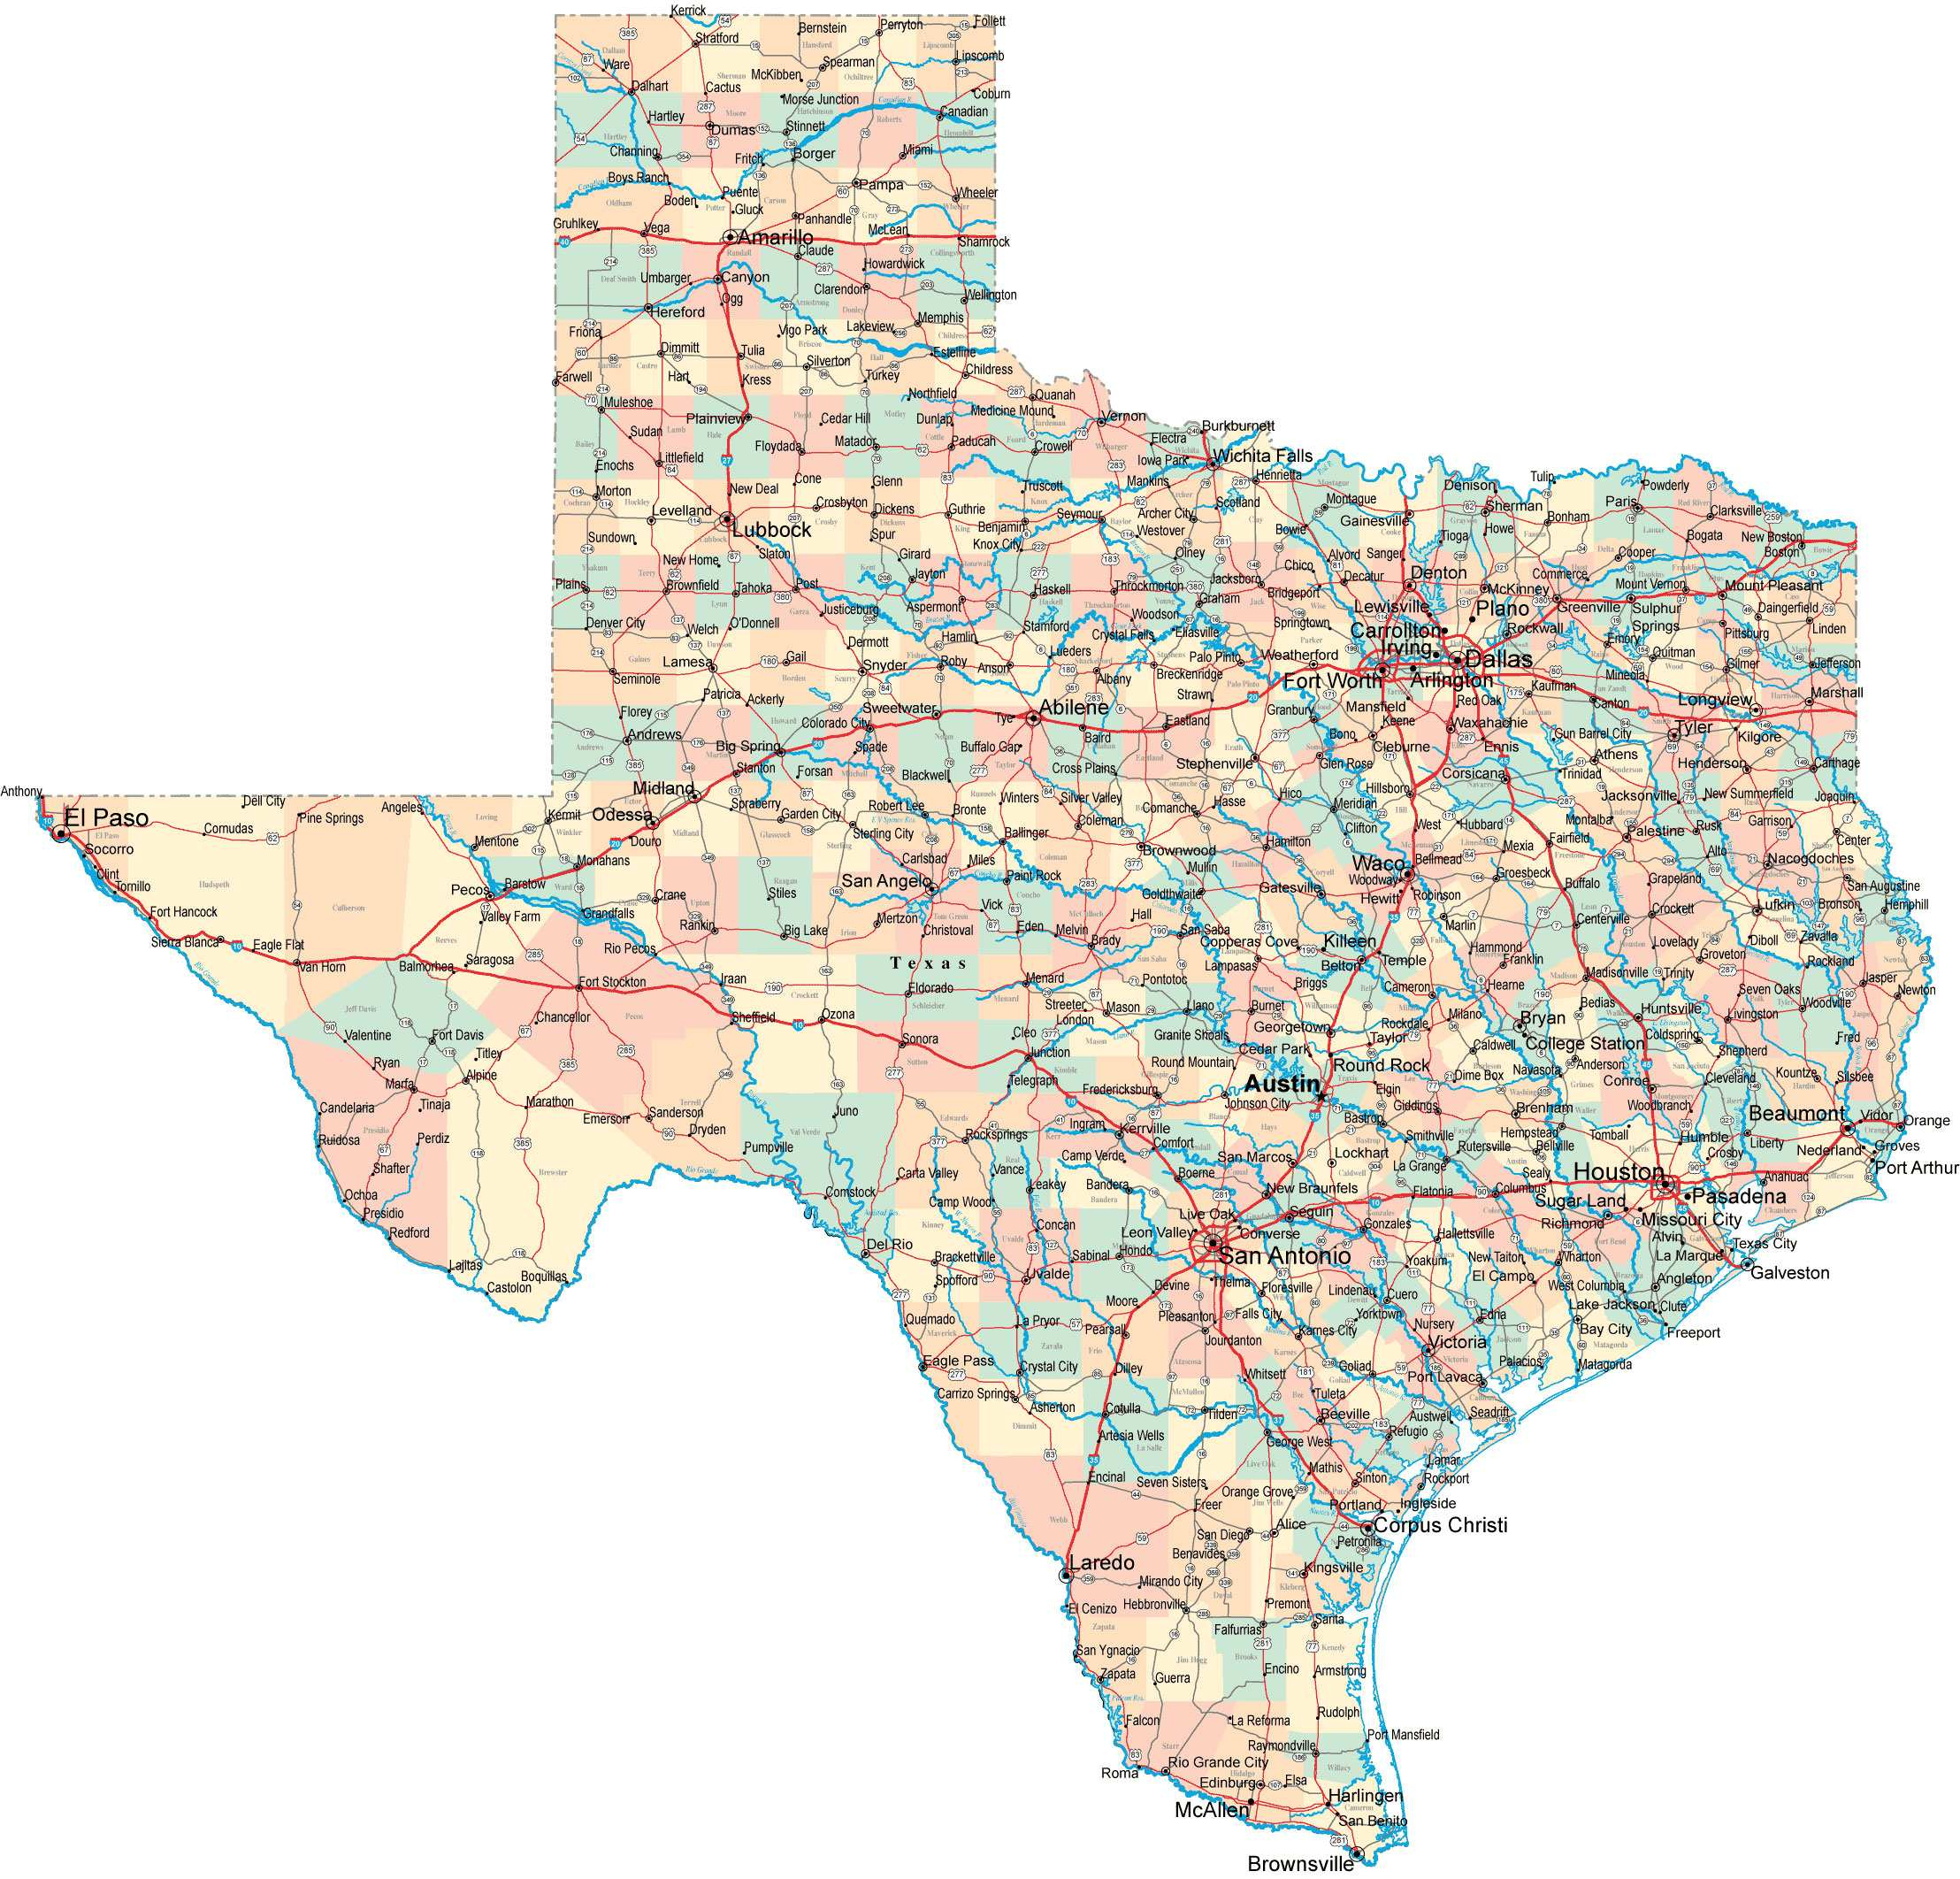 Large Texas Maps For Free Download And Print | High-Resolution And - Texas Road Map Pdf